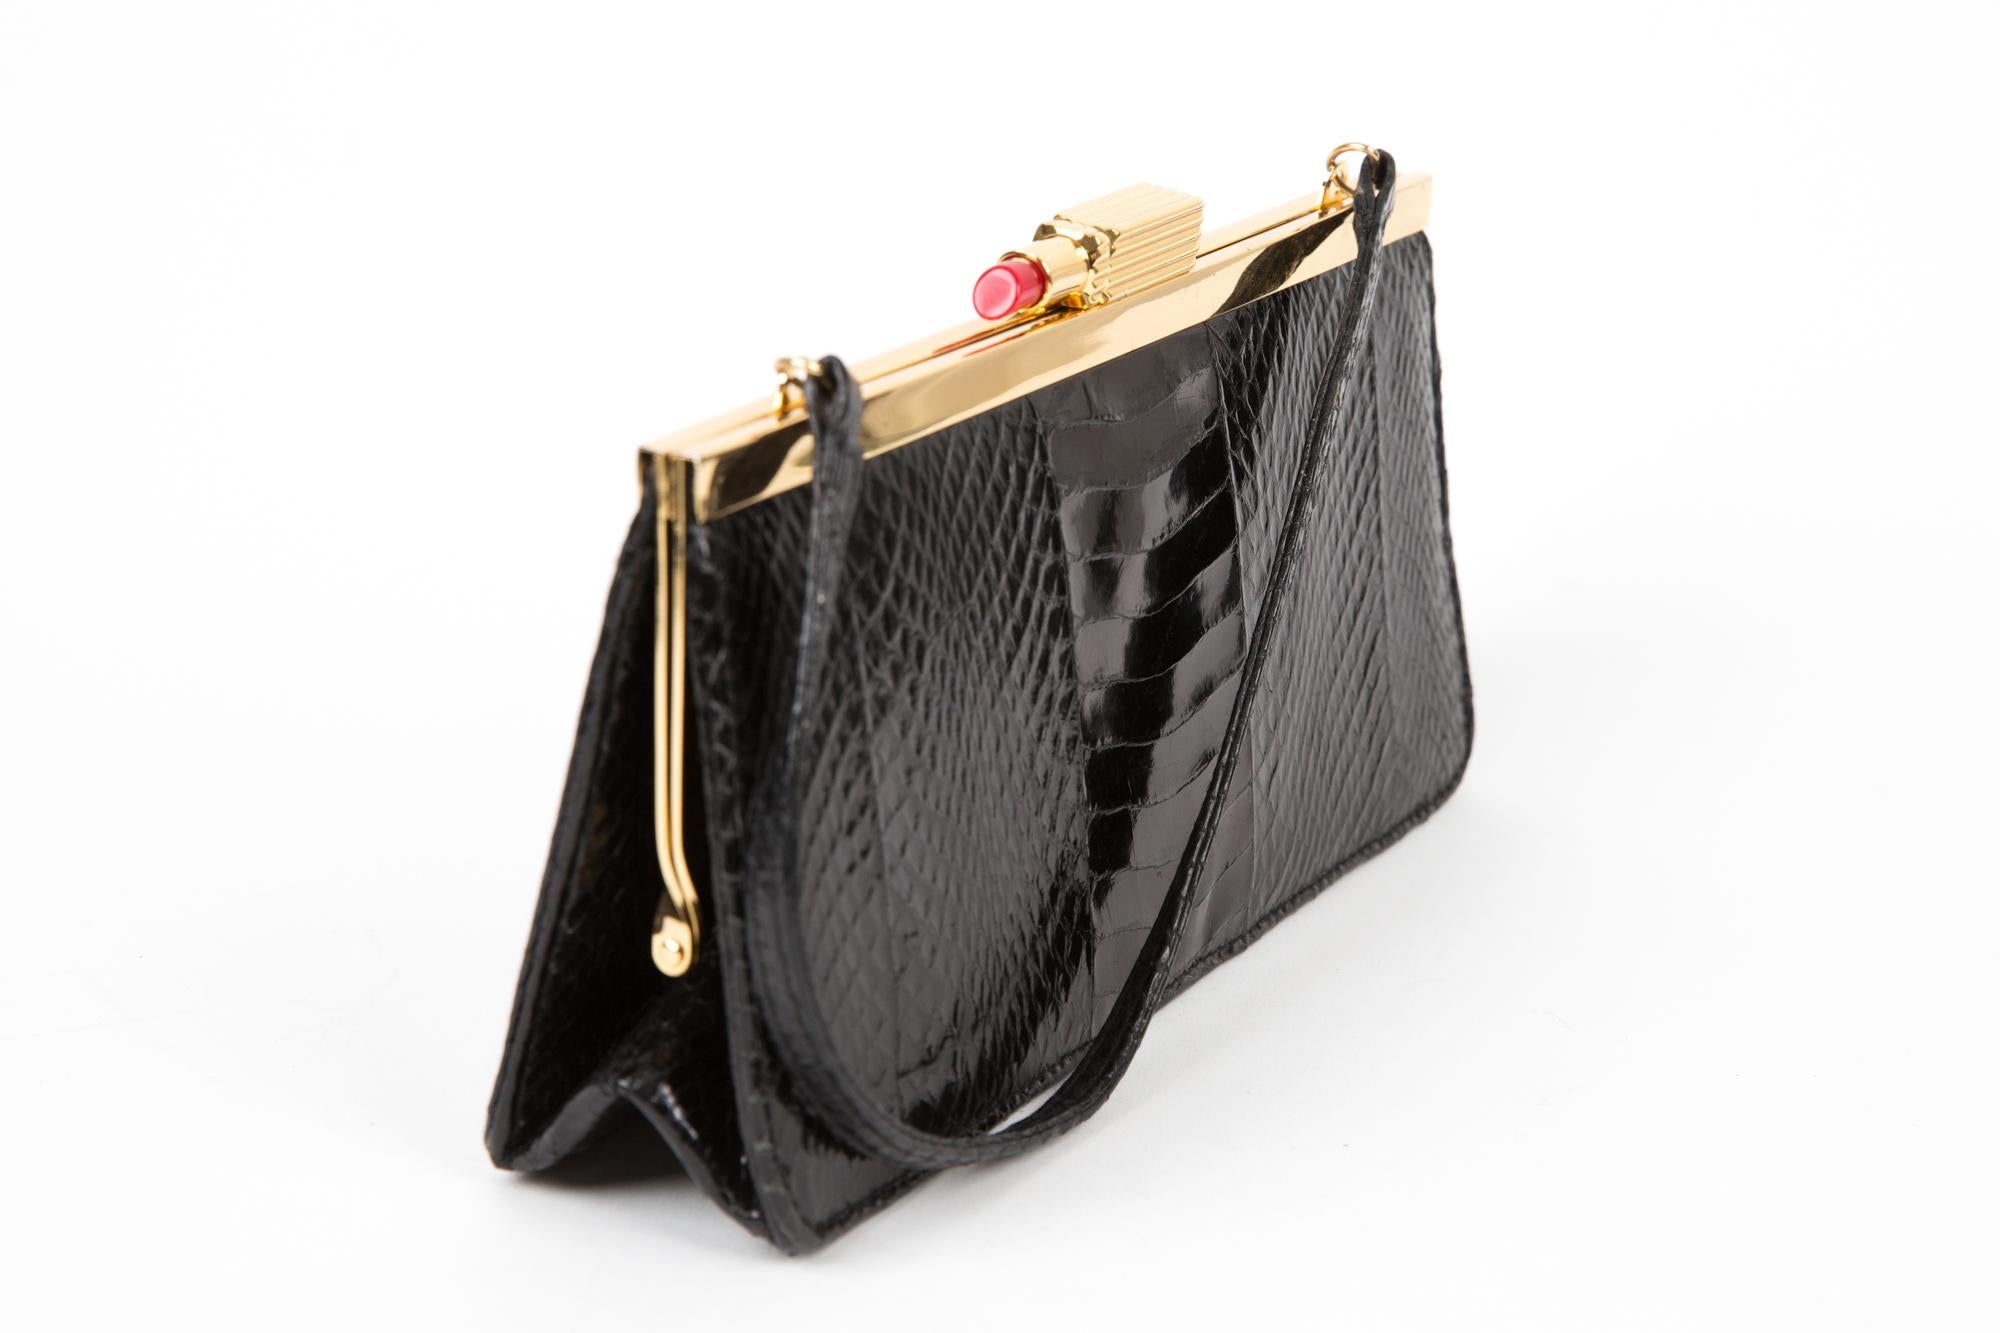 Lulu Guinness Black leather evening hand bag featuring a fancy top lipstick accessory closure, a top handle, gold-tone hardware, a message embroidered inside the bag.
Length : 9.4in (24cm)
Height: 4.3in. (11cm)
Width:1.5in. (4cm)
In good vintage